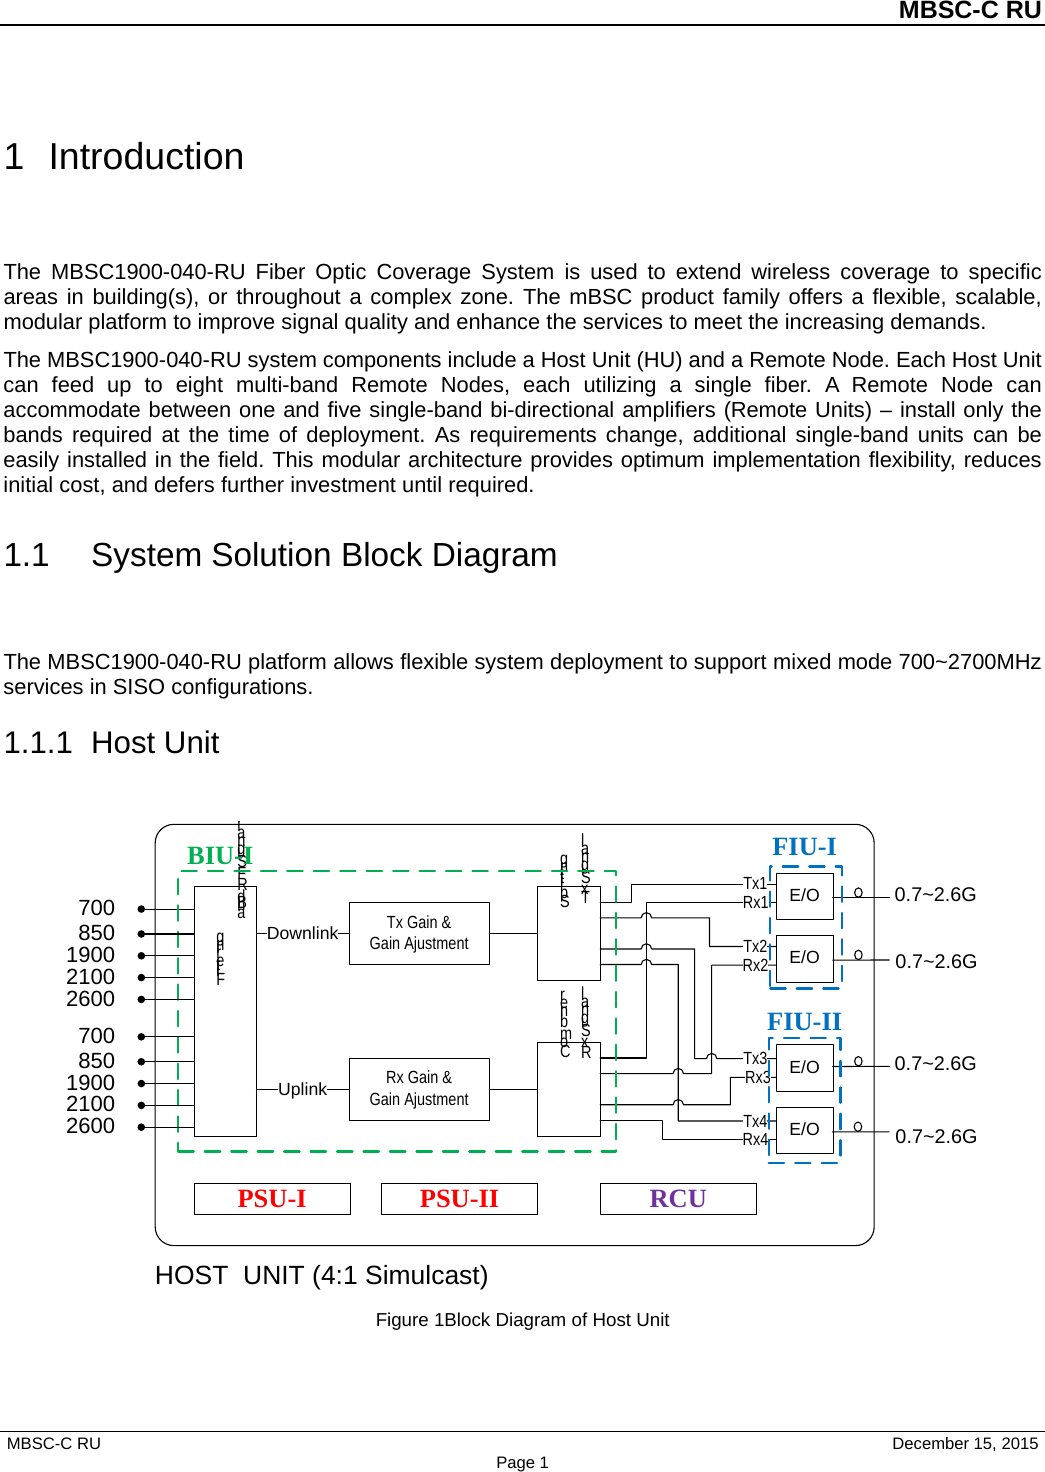 MBSC-C RU MBSC-C RU   December 15, 2015 Page 11  Introduction The  MBSC1900-040-RU Fiber Optic Coverage  System is  used to extend wireless coverage to specific areas in building(s), or throughout a complex zone. The mBSC product family offers a flexible, scalable, modular platform to improve signal quality and enhance the services to meet the increasing demands. The MBSC1900-040-RU system components include a Host Unit (HU) and a Remote Node. Each Host Unit can feed up to eight multi-band  Remote  Nodes,  each  utilizing a  single fiber. A Remote Node can accommodate between one and five single-band bi-directional amplifiers (Remote Units) – install only the bands required at the time of deployment.  As requirements change, additional single-band units can be easily installed in the field. This modular architecture provides optimum implementation flexibility, reduces initial cost, and defers further investment until required. 1.1 System Solution Block Diagram The MBSC1900-040-RU platform allows flexible system deployment to support mixed mode 700~2700MHz services in SISO configurations. 1.1.1 Host Unit Band RF Signal ProcessingFilteringE/OTx Gain &amp;Gain AjustmentTx Signal Splitting700Rx Gain &amp;Gain AjustmentRx Signal CombinerE/OE/OTx1DownlinkUplinkE/OTx2Tx3Tx4Rx1Rx2Rx3Rx4BIU-I FIU-IPSU-I PSU-II RCU0.7~2.6G0.7~2.6GFIU-IIHOST  UNIT (4:1 Simulcast)8501900210026007008501900210026000.7~2.6G0.7~2.6GFigure 1Block Diagram of Host Unit 